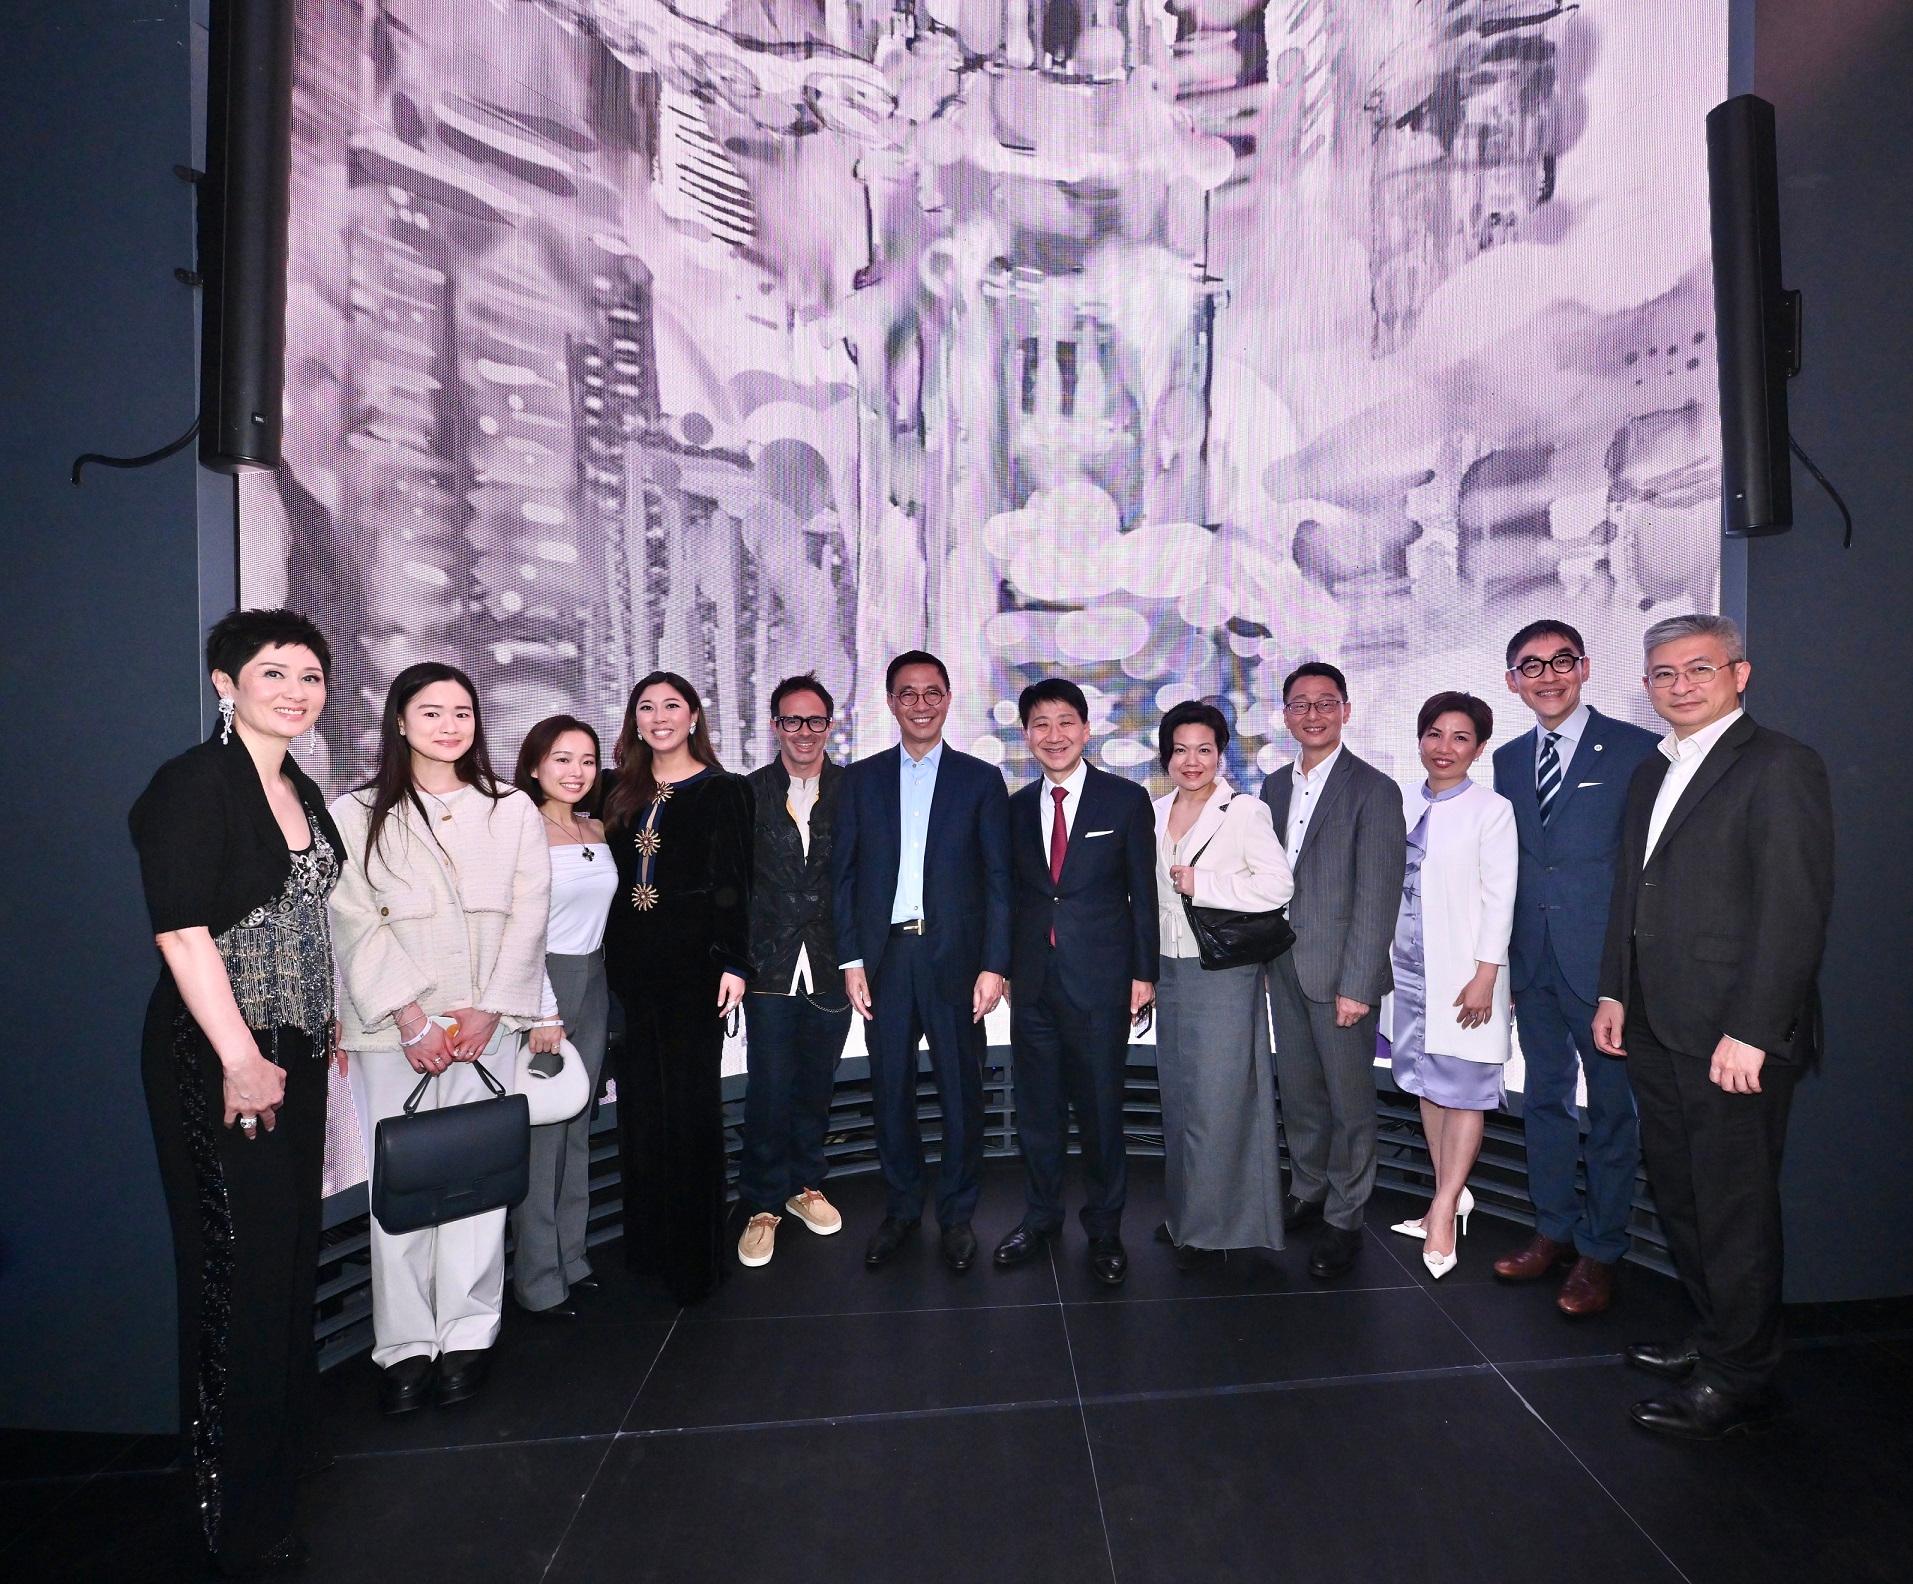 The Secretary for Culture, Sports and Tourism, Mr Kevin Yeung, officiated at the launching ceremony of "Voyage with Van Gogh" of "Art@Harbour 2024" today (March 28). Picture shows Mr Yeung (sixth left); the Director of Leisure and Cultural Services, Mr Vincent Liu (fourth right); member of the Mega Arts and Cultural Events Committee Ms Yolanda Ng (third right); the Chairman of the Museum Advisory Committee, Professor Douglas So (second right); the Chairman of the First Initiative Foundation (FIF), Ms Michelle Ong (first left); the Managing Director of the FIF, Ms Amanda Cheung (fourth left); and the Spanish Digital Artist of VISURA Studio, Vritis (fifth left), at the exhibition.